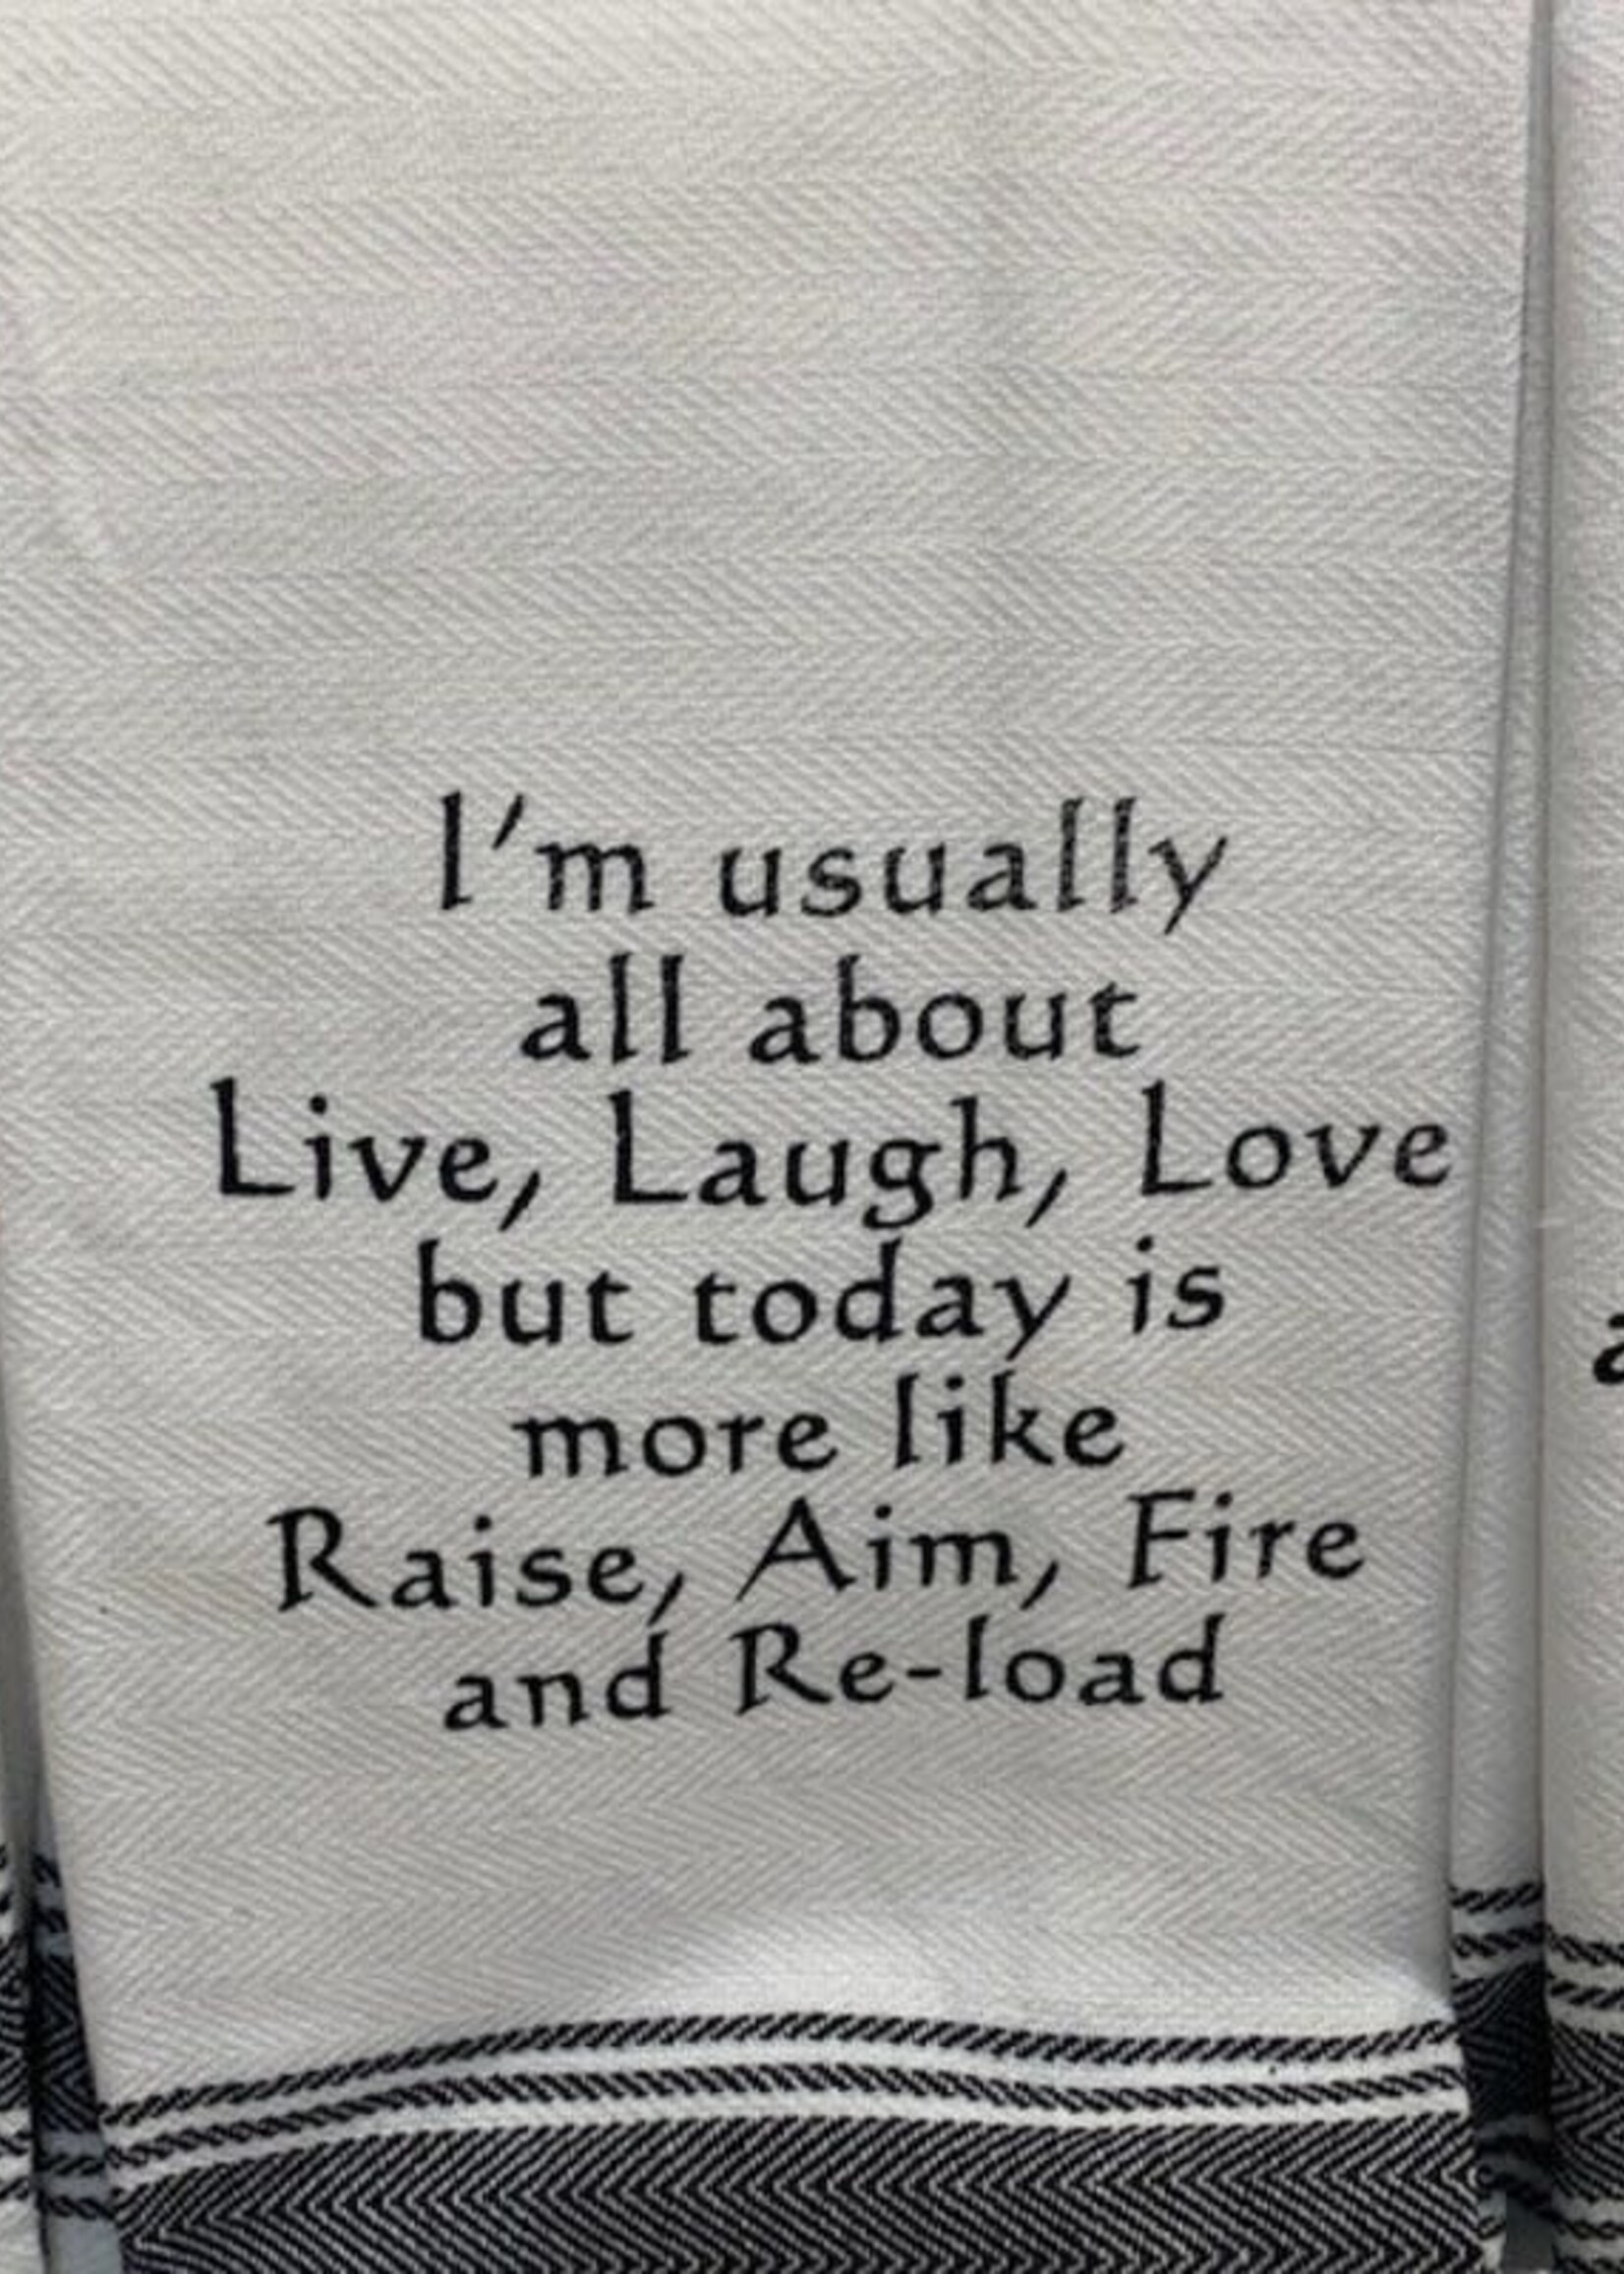 I'm usually all about Live, Laugh, Love but today is more like Raise, Aim, Fire towel